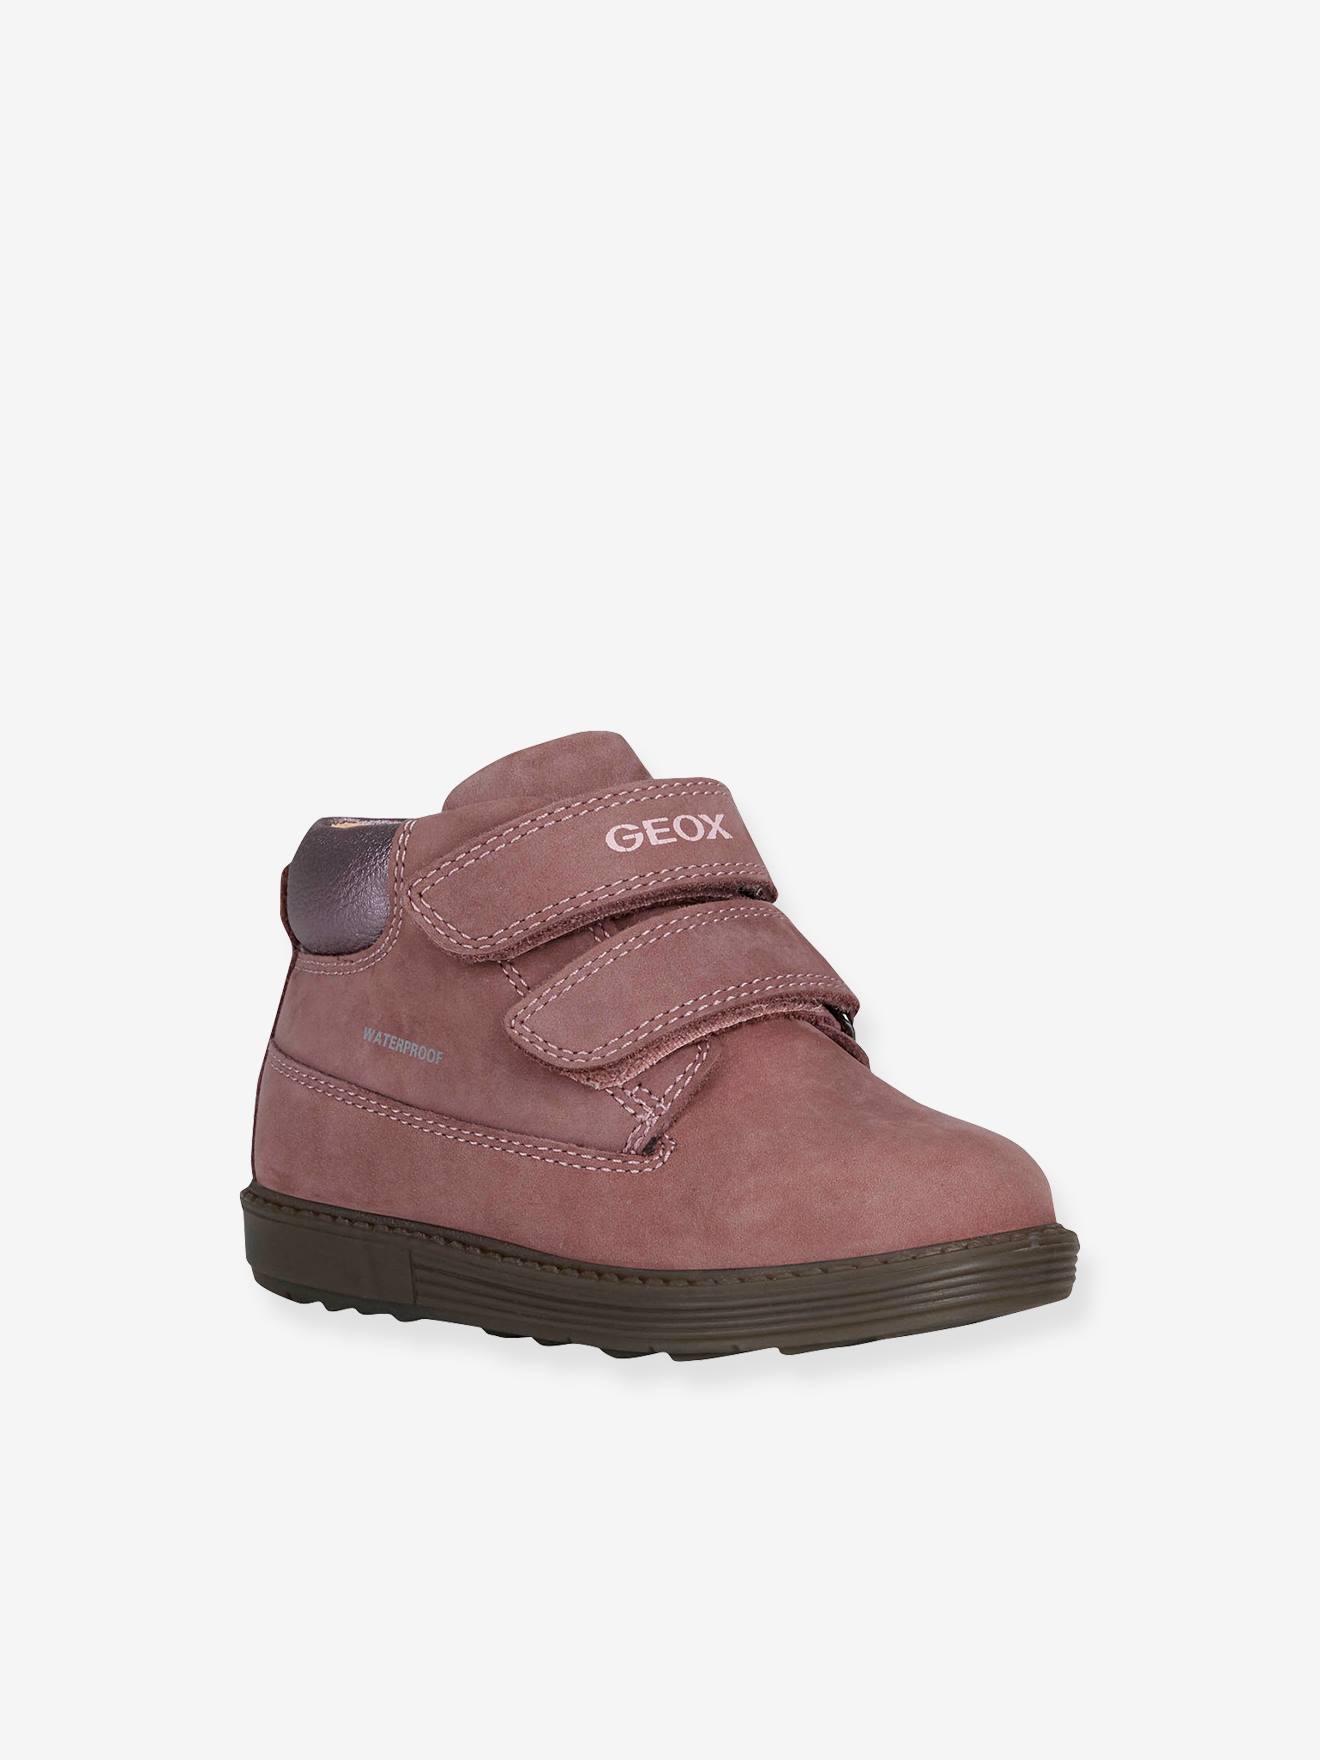 Boots for Baby Girls, B Hynde Girl WPF by GEOX(r) dark pink